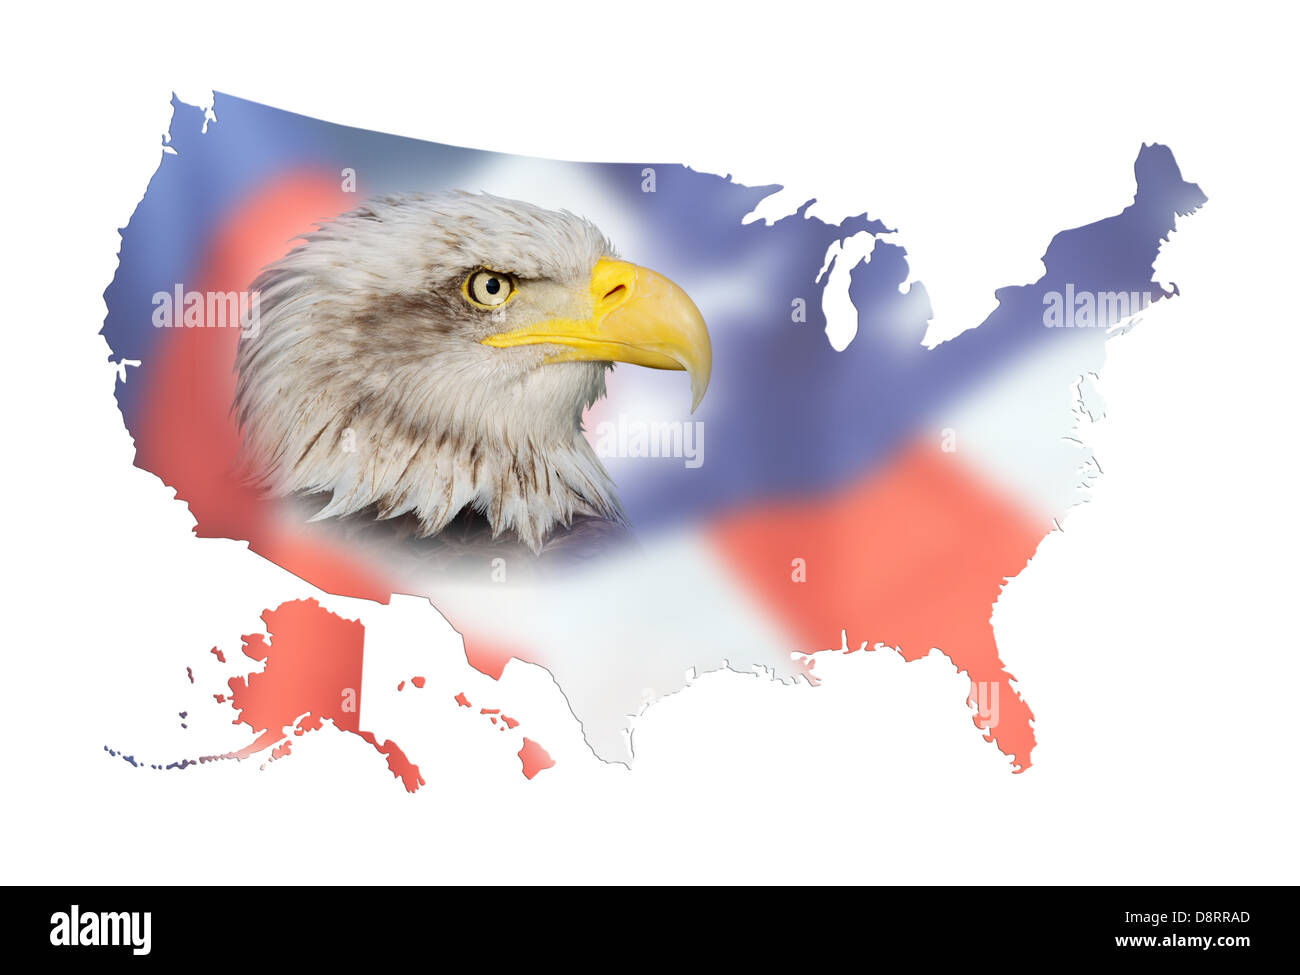 composition with a map ot the united states of america, a flag and a bald eagle Stock Photo